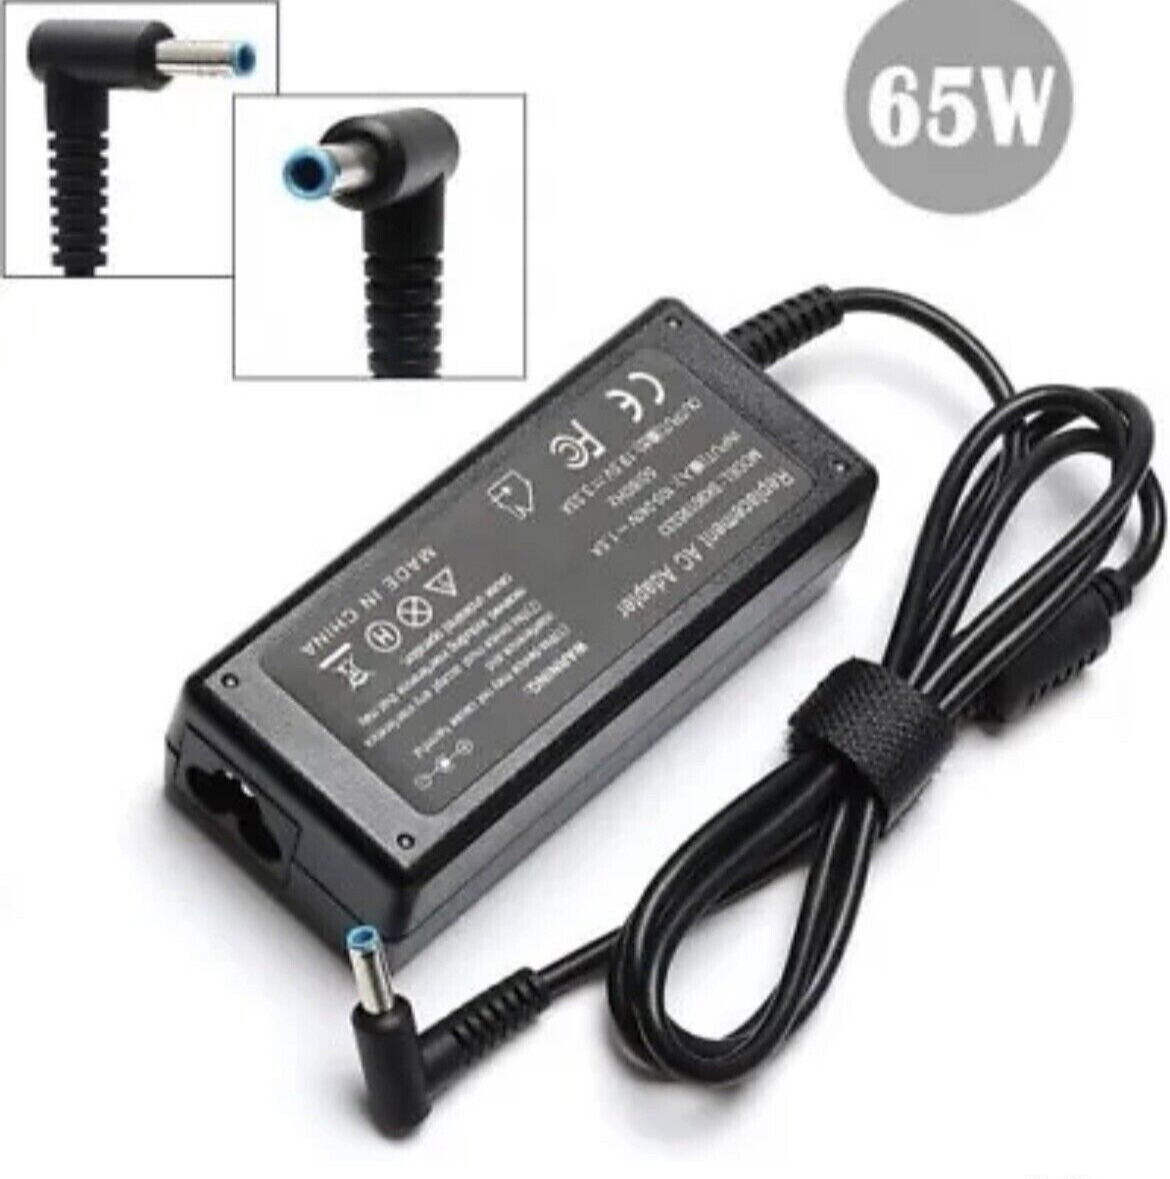 *NEW Replacement AC Adapter SK90195333 For HP 19.5V 3.33A NO POWER CORD